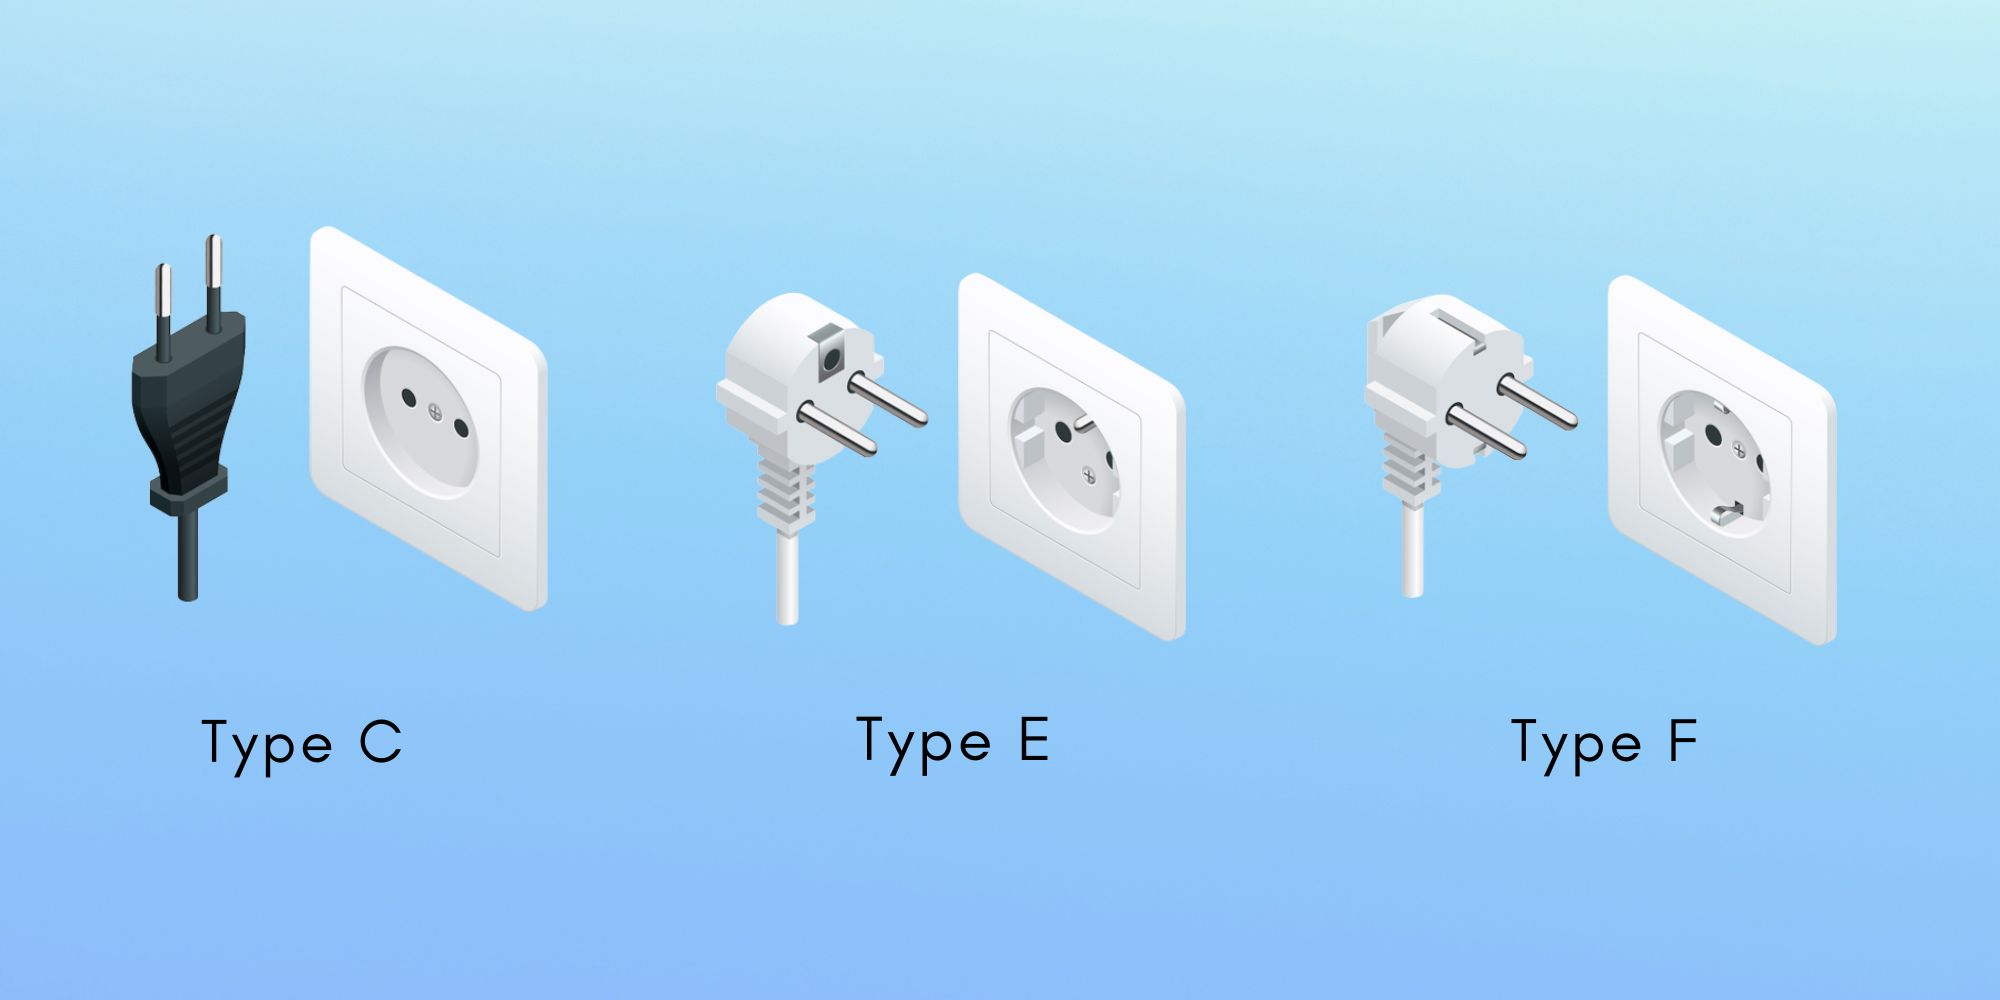 Canary Islands Power Plugs and Sockets: Type C, Type E, and Type F
